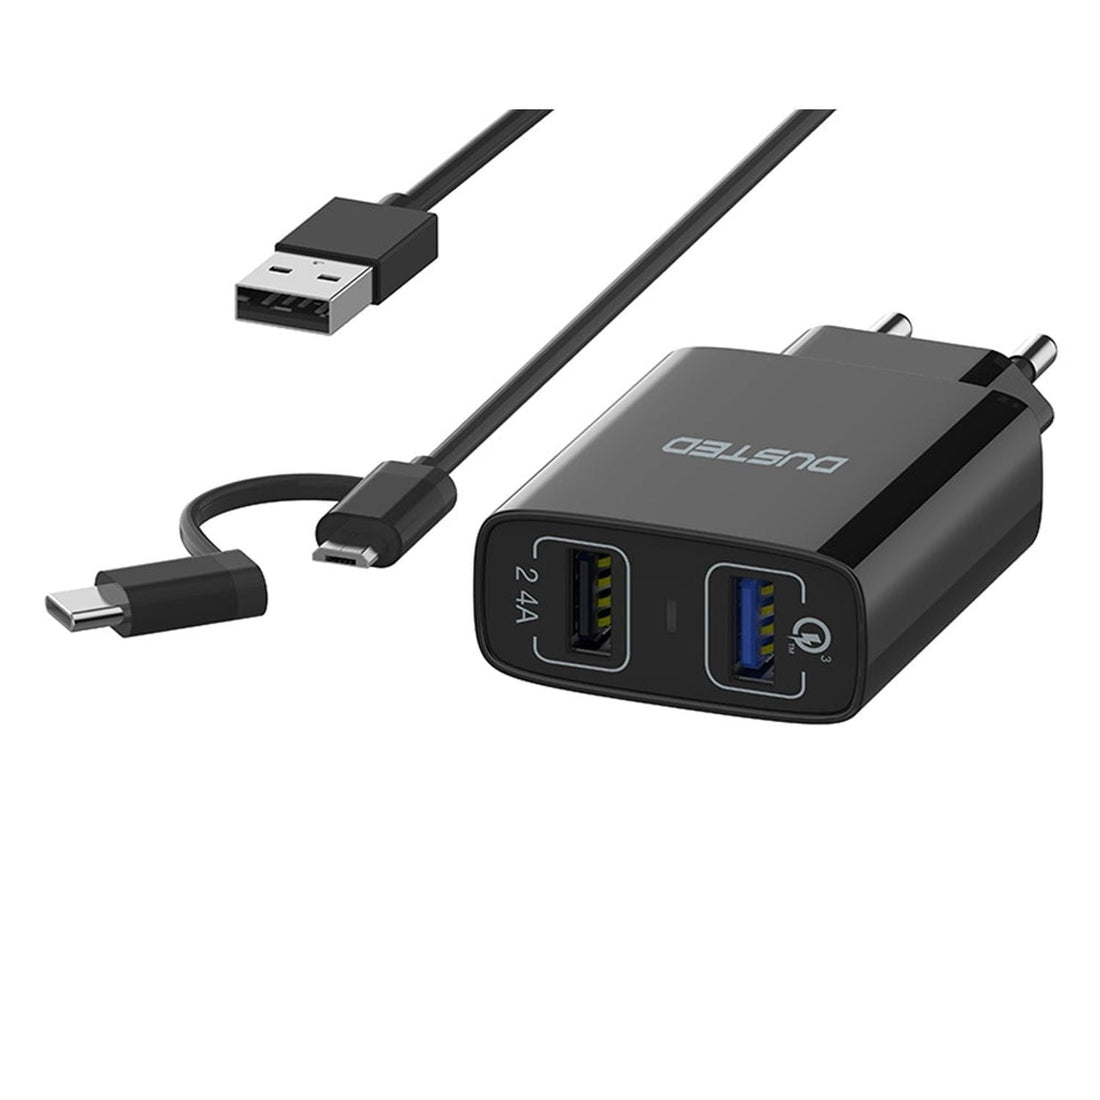 Cargador Quick Charge Slim 2-en-1 QC 3.0-18W con Cable USB dual Dusted negro